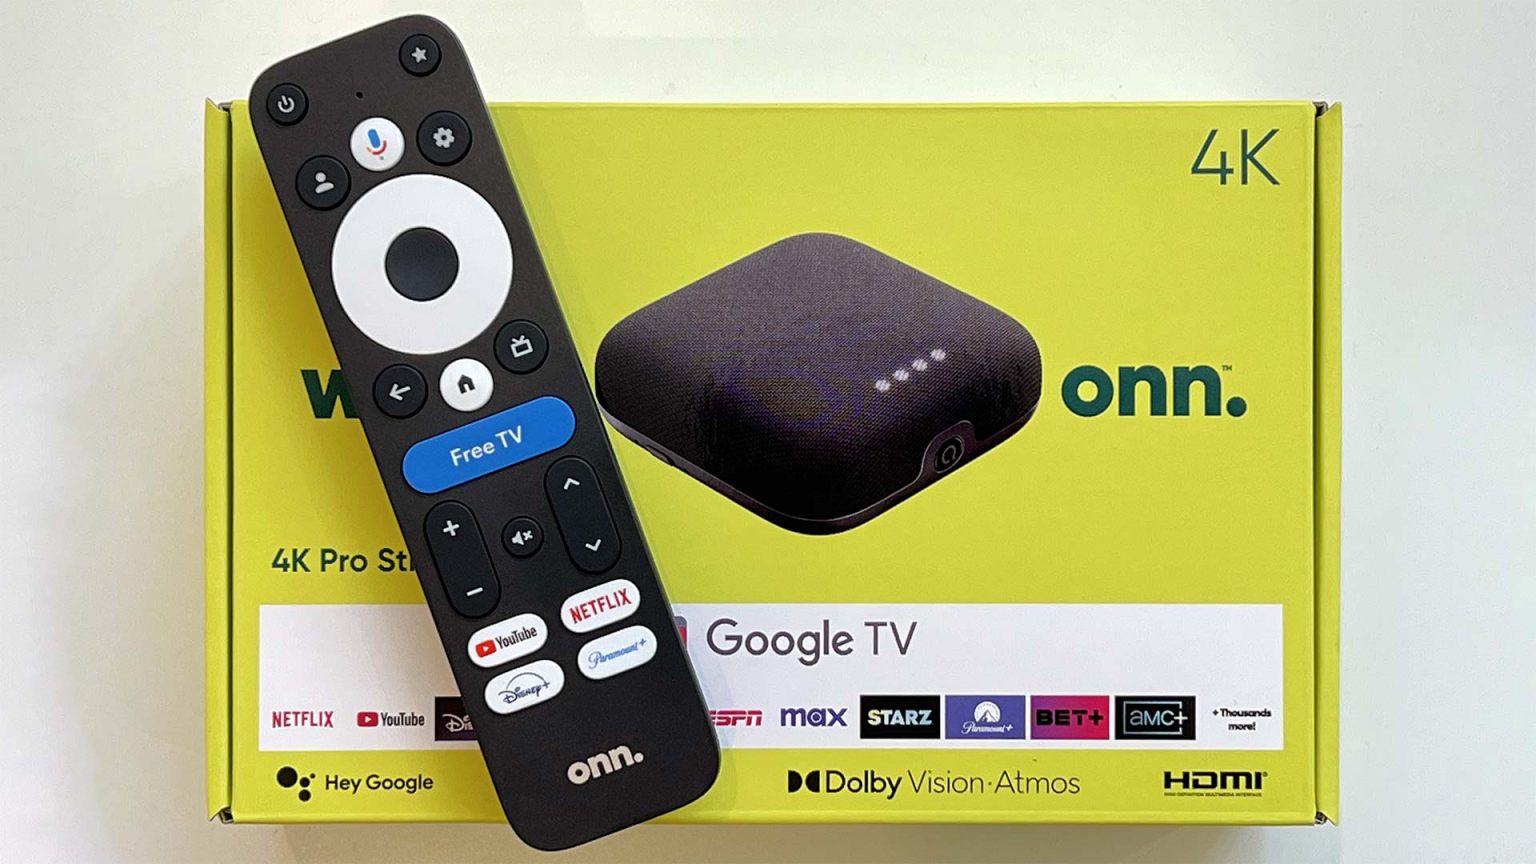 A Walmart Onn 4K Pro box with a remote sitting on top